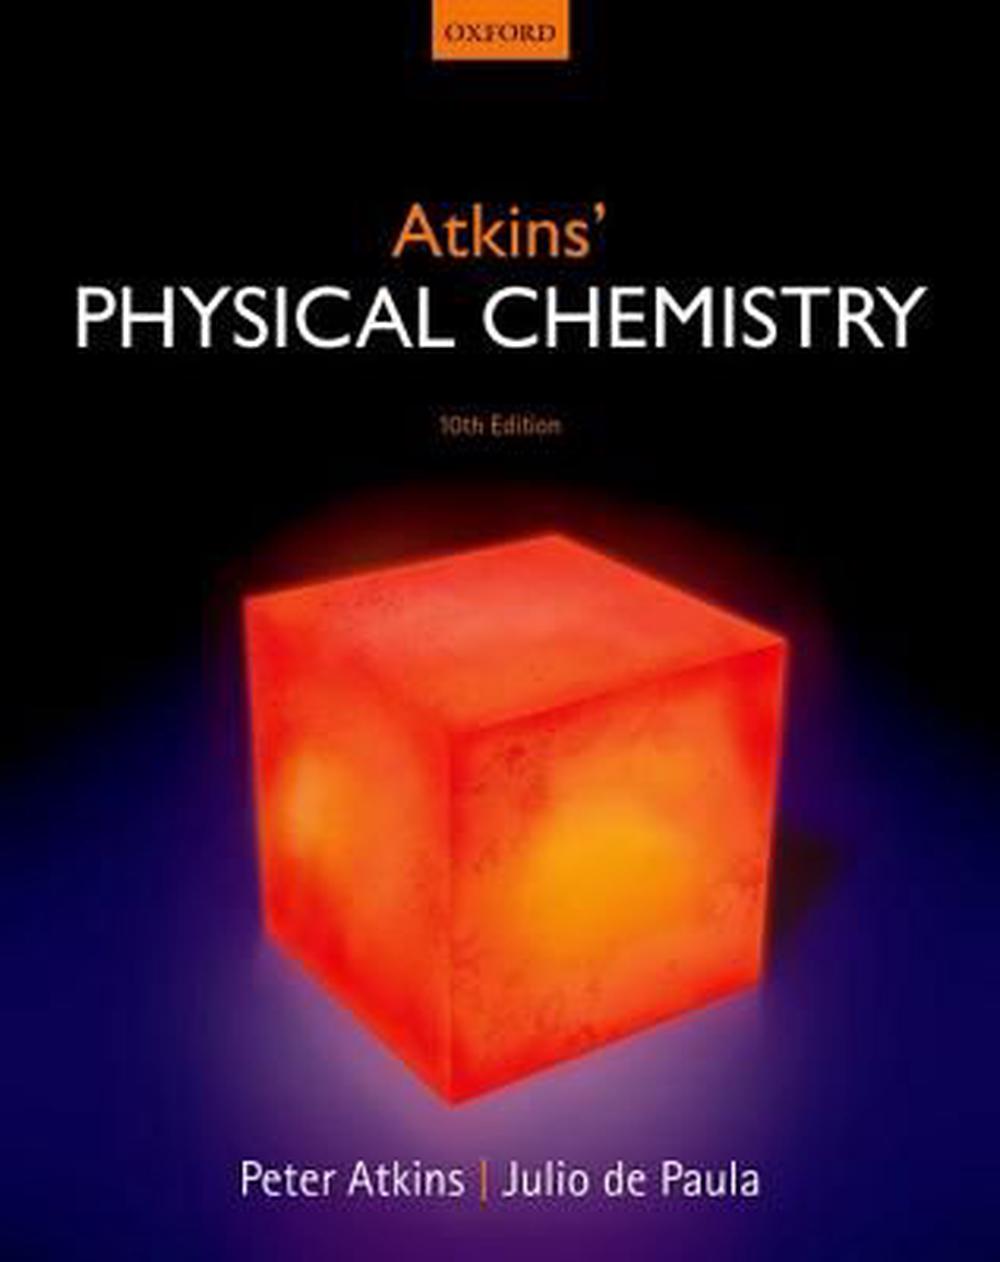 elements of physical chemistry by peter atkins